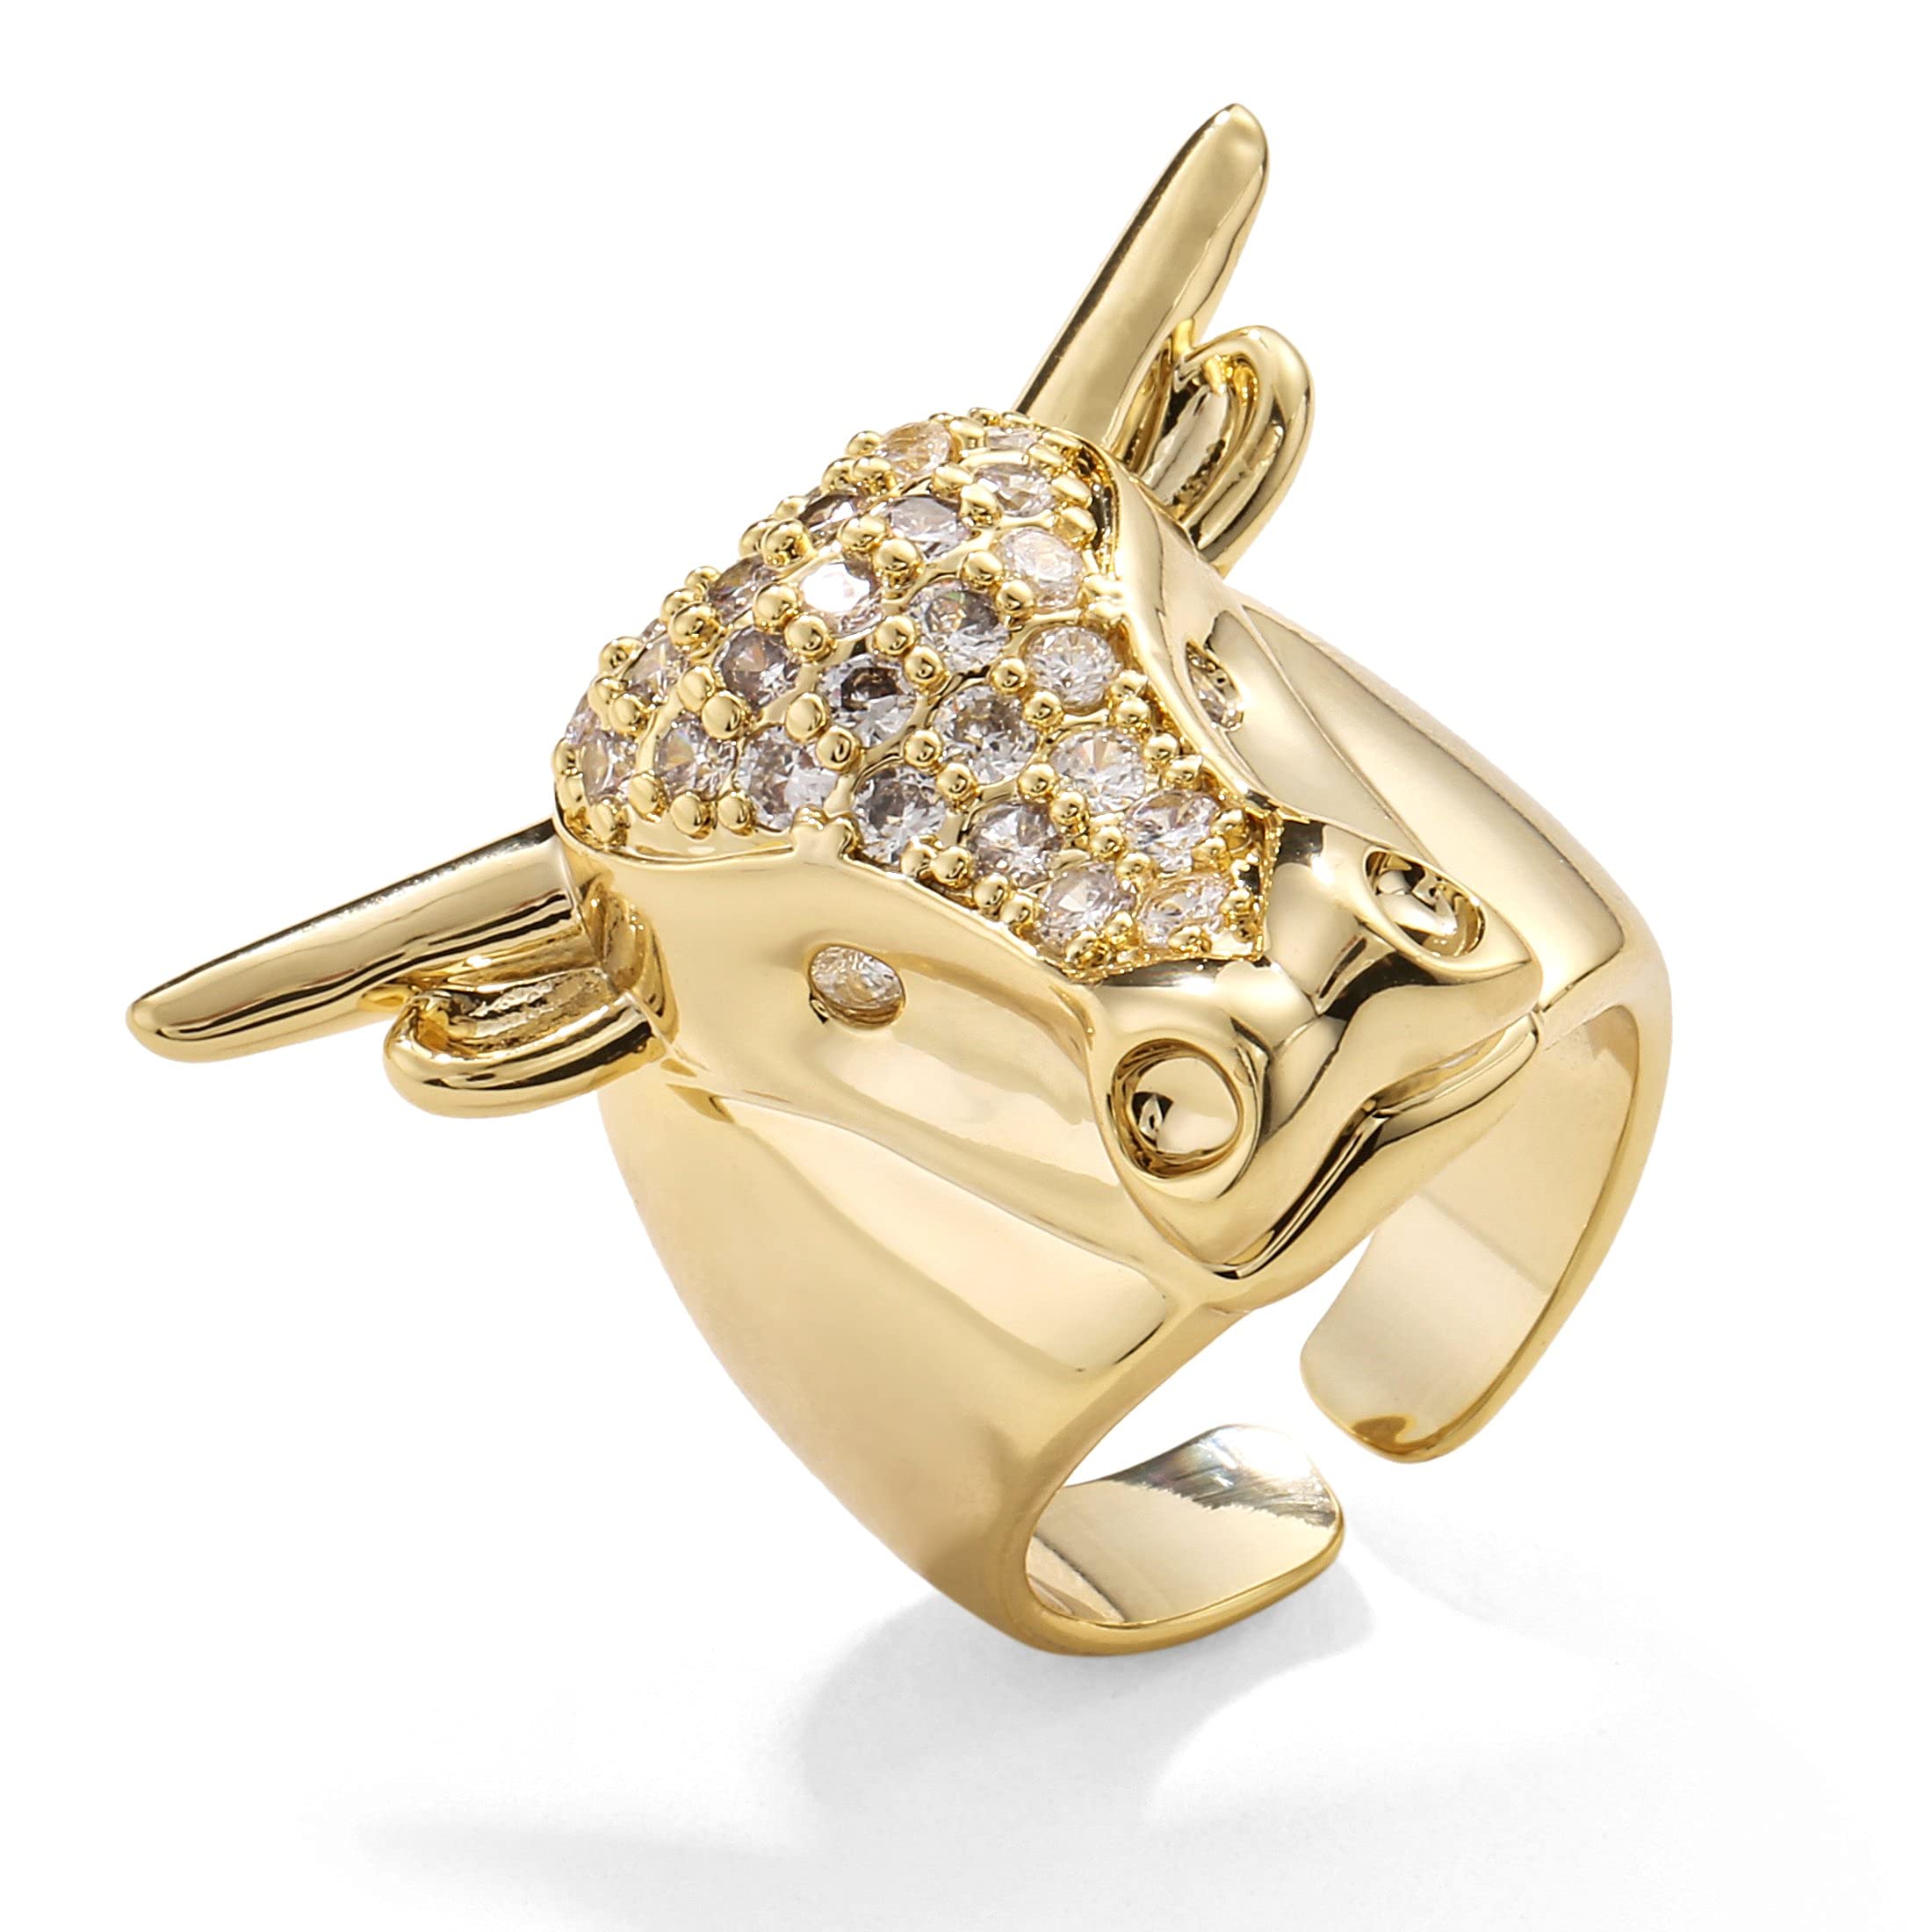 THE BLING KING Big Gold Bull Ring with Stones - Adjustable Ring for Men with Real Gold Plating - Premium Gold Fashion Ring - Men's Unique Jewellery Gold Ring Gift for Anniversary or Birthday Gifts